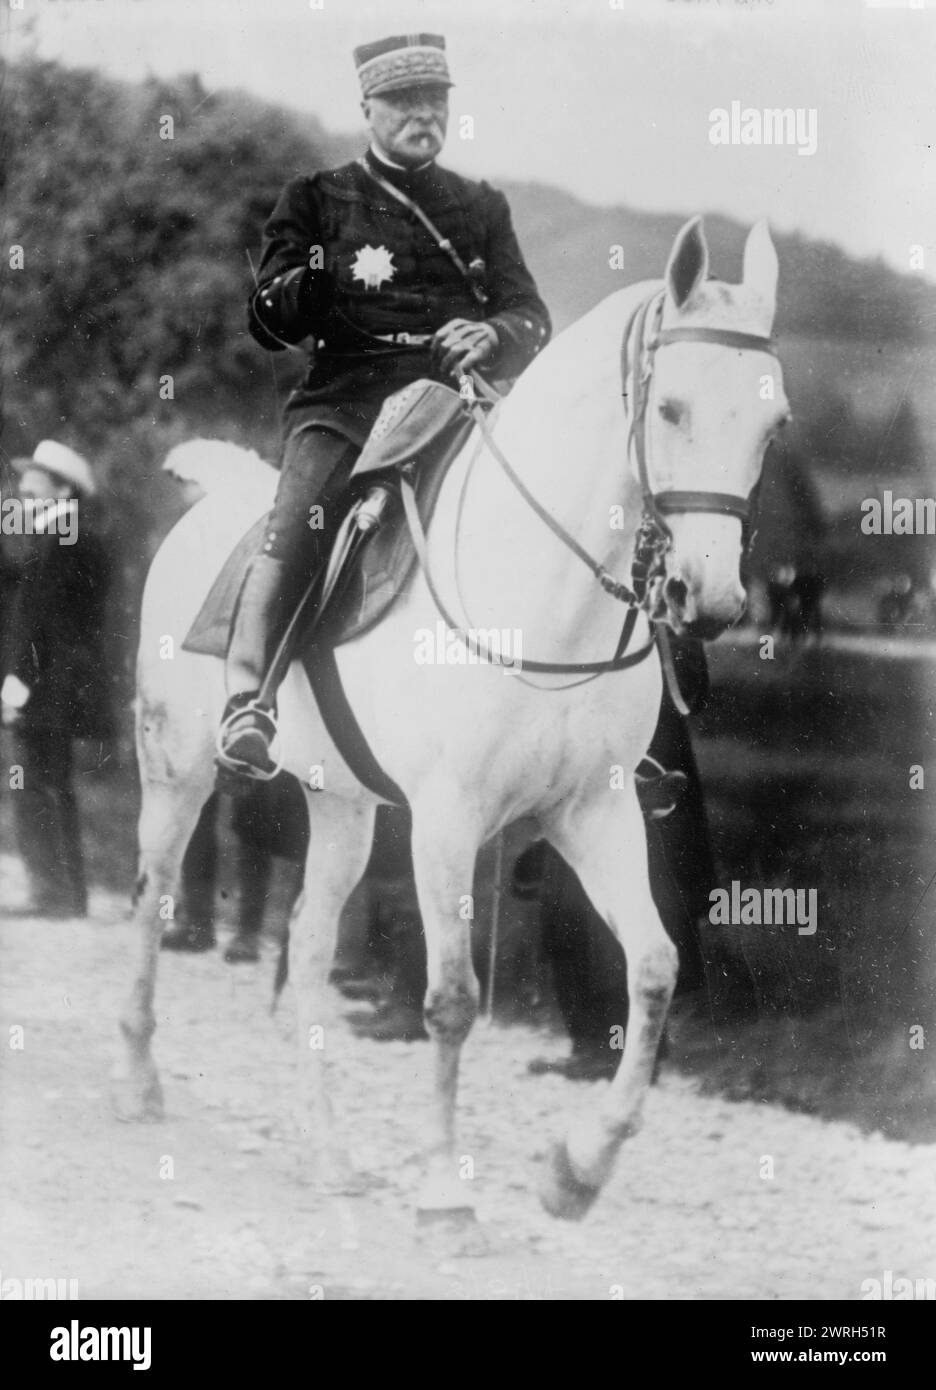 Gen. Pau, c.Aug 1914. French General Paul Marie Cesar Gerald Pau, (1848-1932), probably at the beginning of World War I. Stock Photo